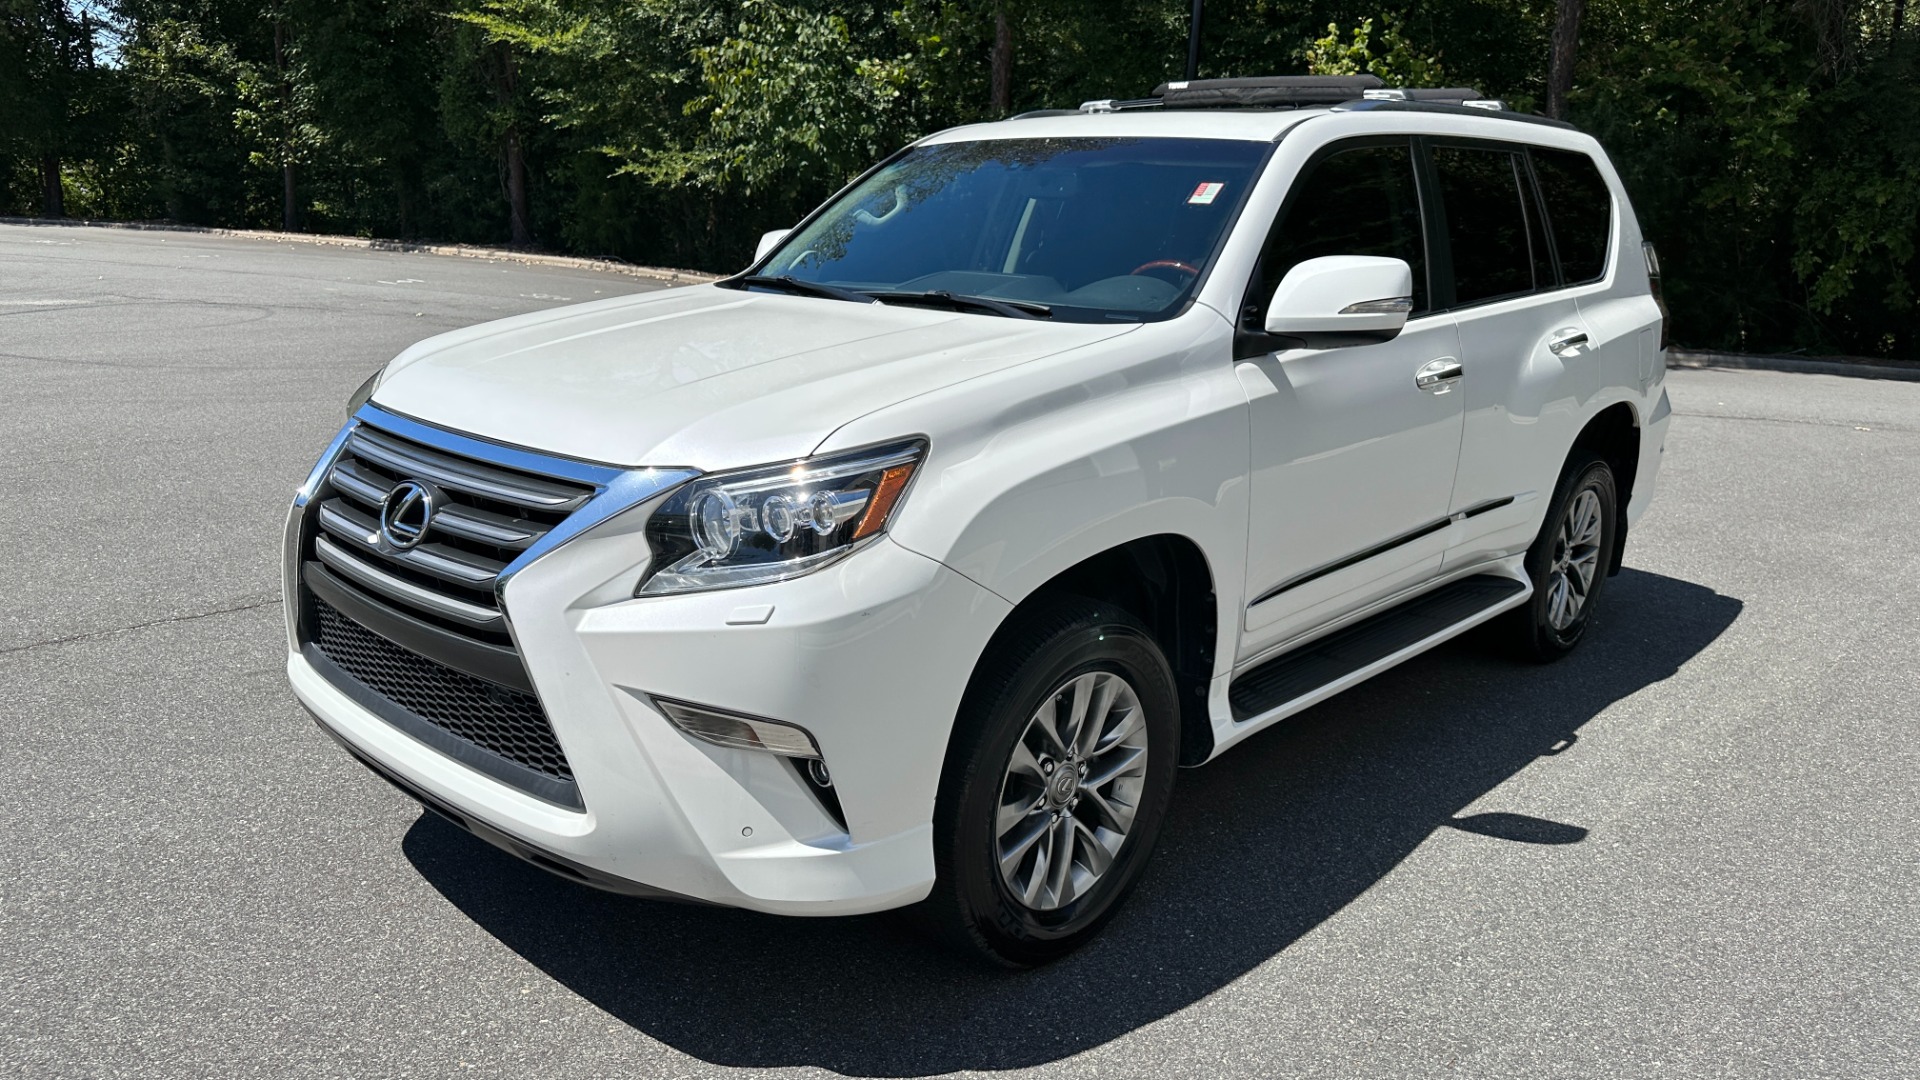 Used 2015 Lexus GX 460 LUXURY / MARK LEVINSON / ADJUSTABLE SUSPENSION / TOW HITCH / 3RD ROW for sale Sold at Formula Imports in Charlotte NC 28227 2